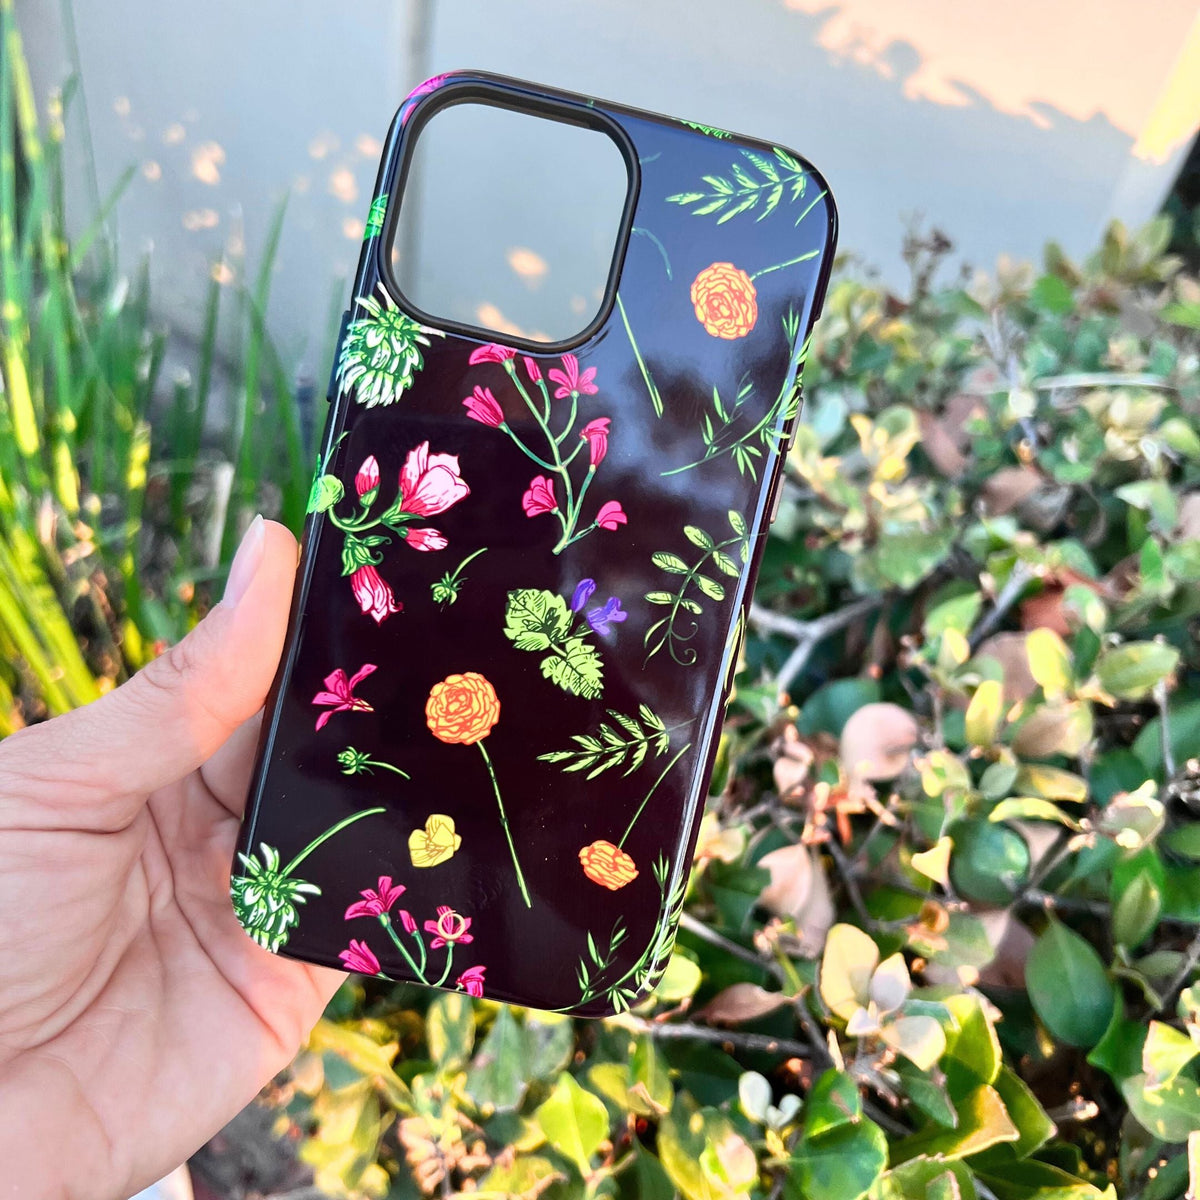 Blossom Field Flowers iPhone Case - Select a Device